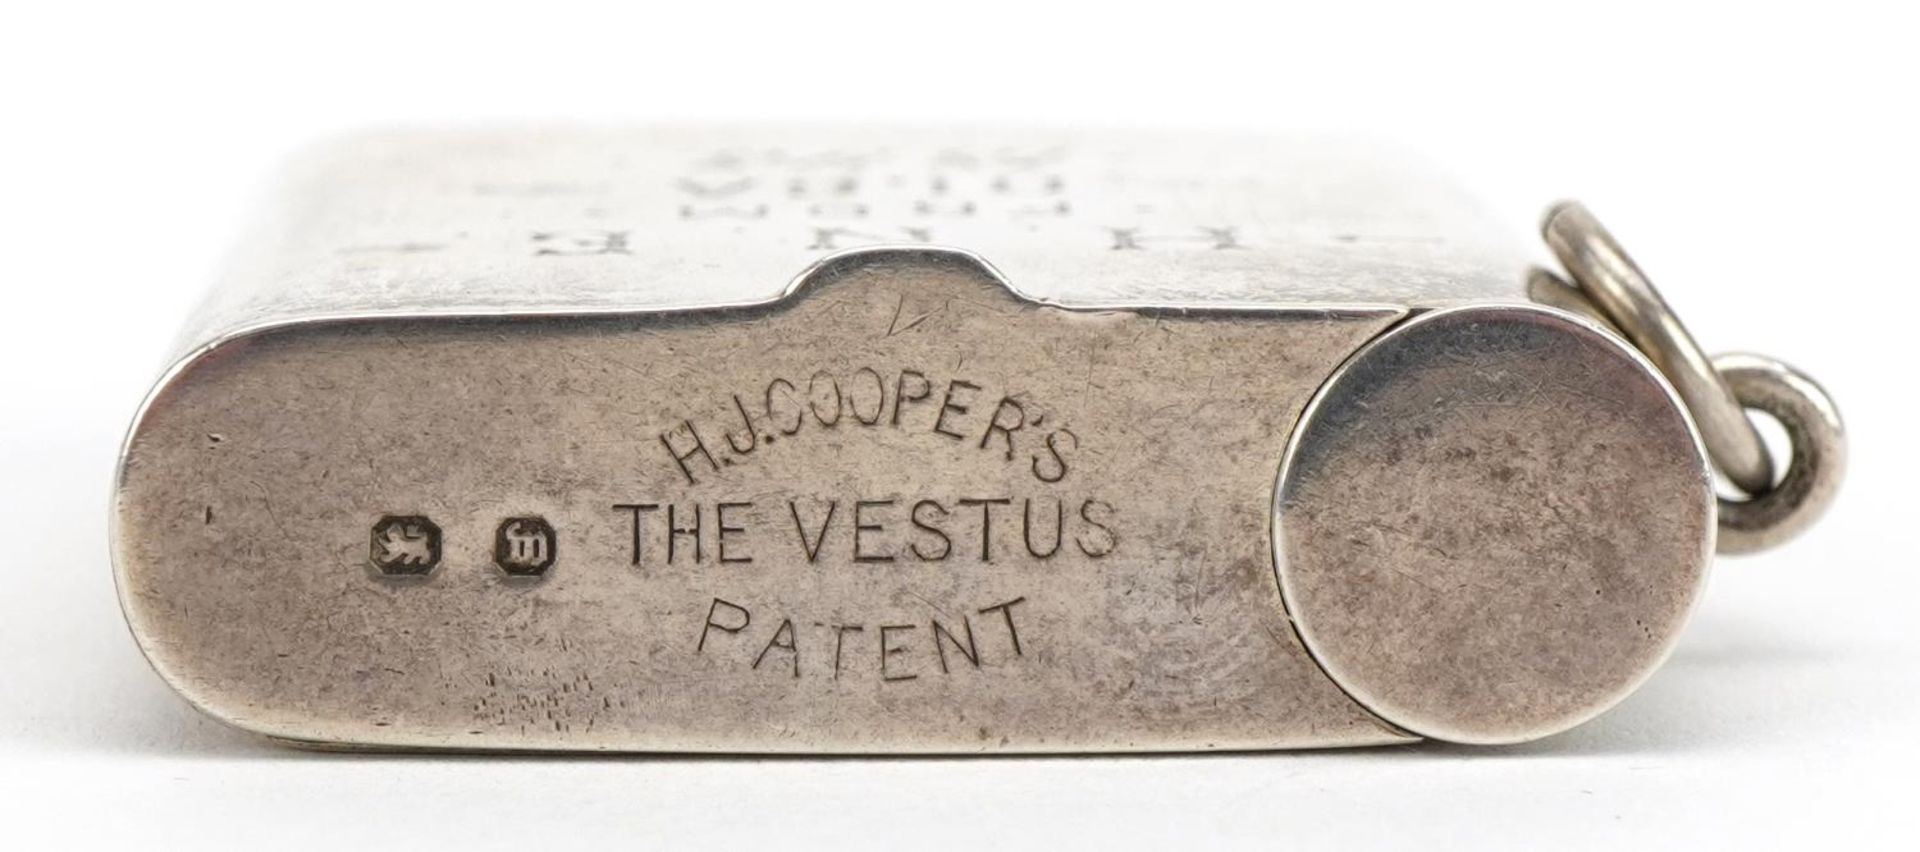 J Collyer & Co Ltd, The Vestus Patent Victorian silver vesta with pipe tamper and cigar pricker by H - Image 7 of 7